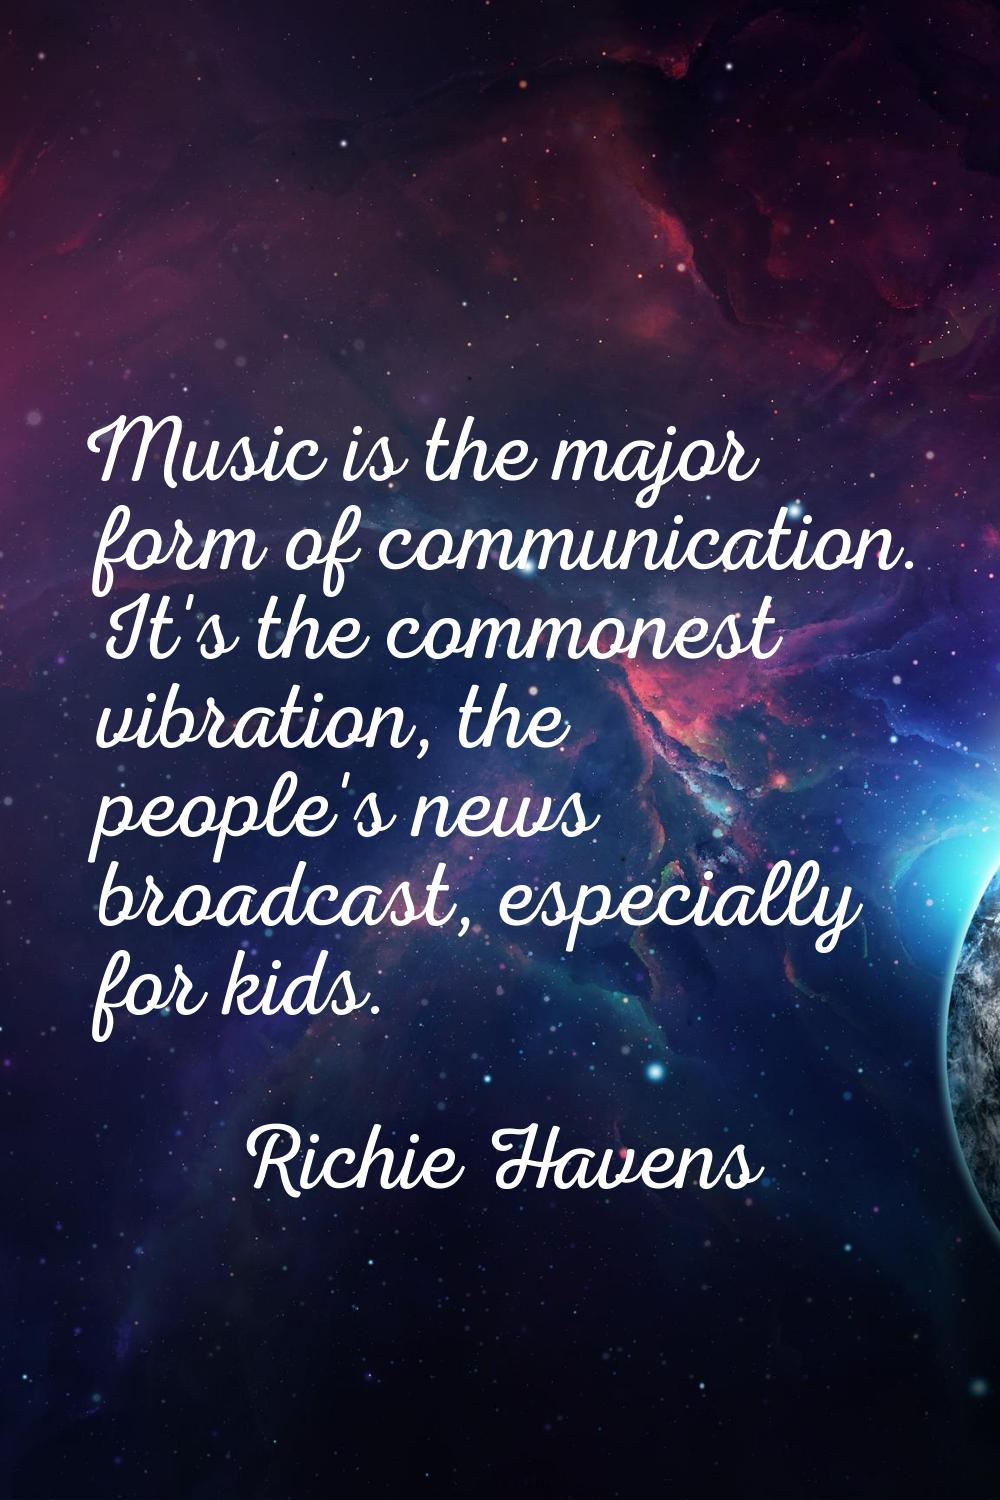 Music is the major form of communication. It's the commonest vibration, the people's news broadcast